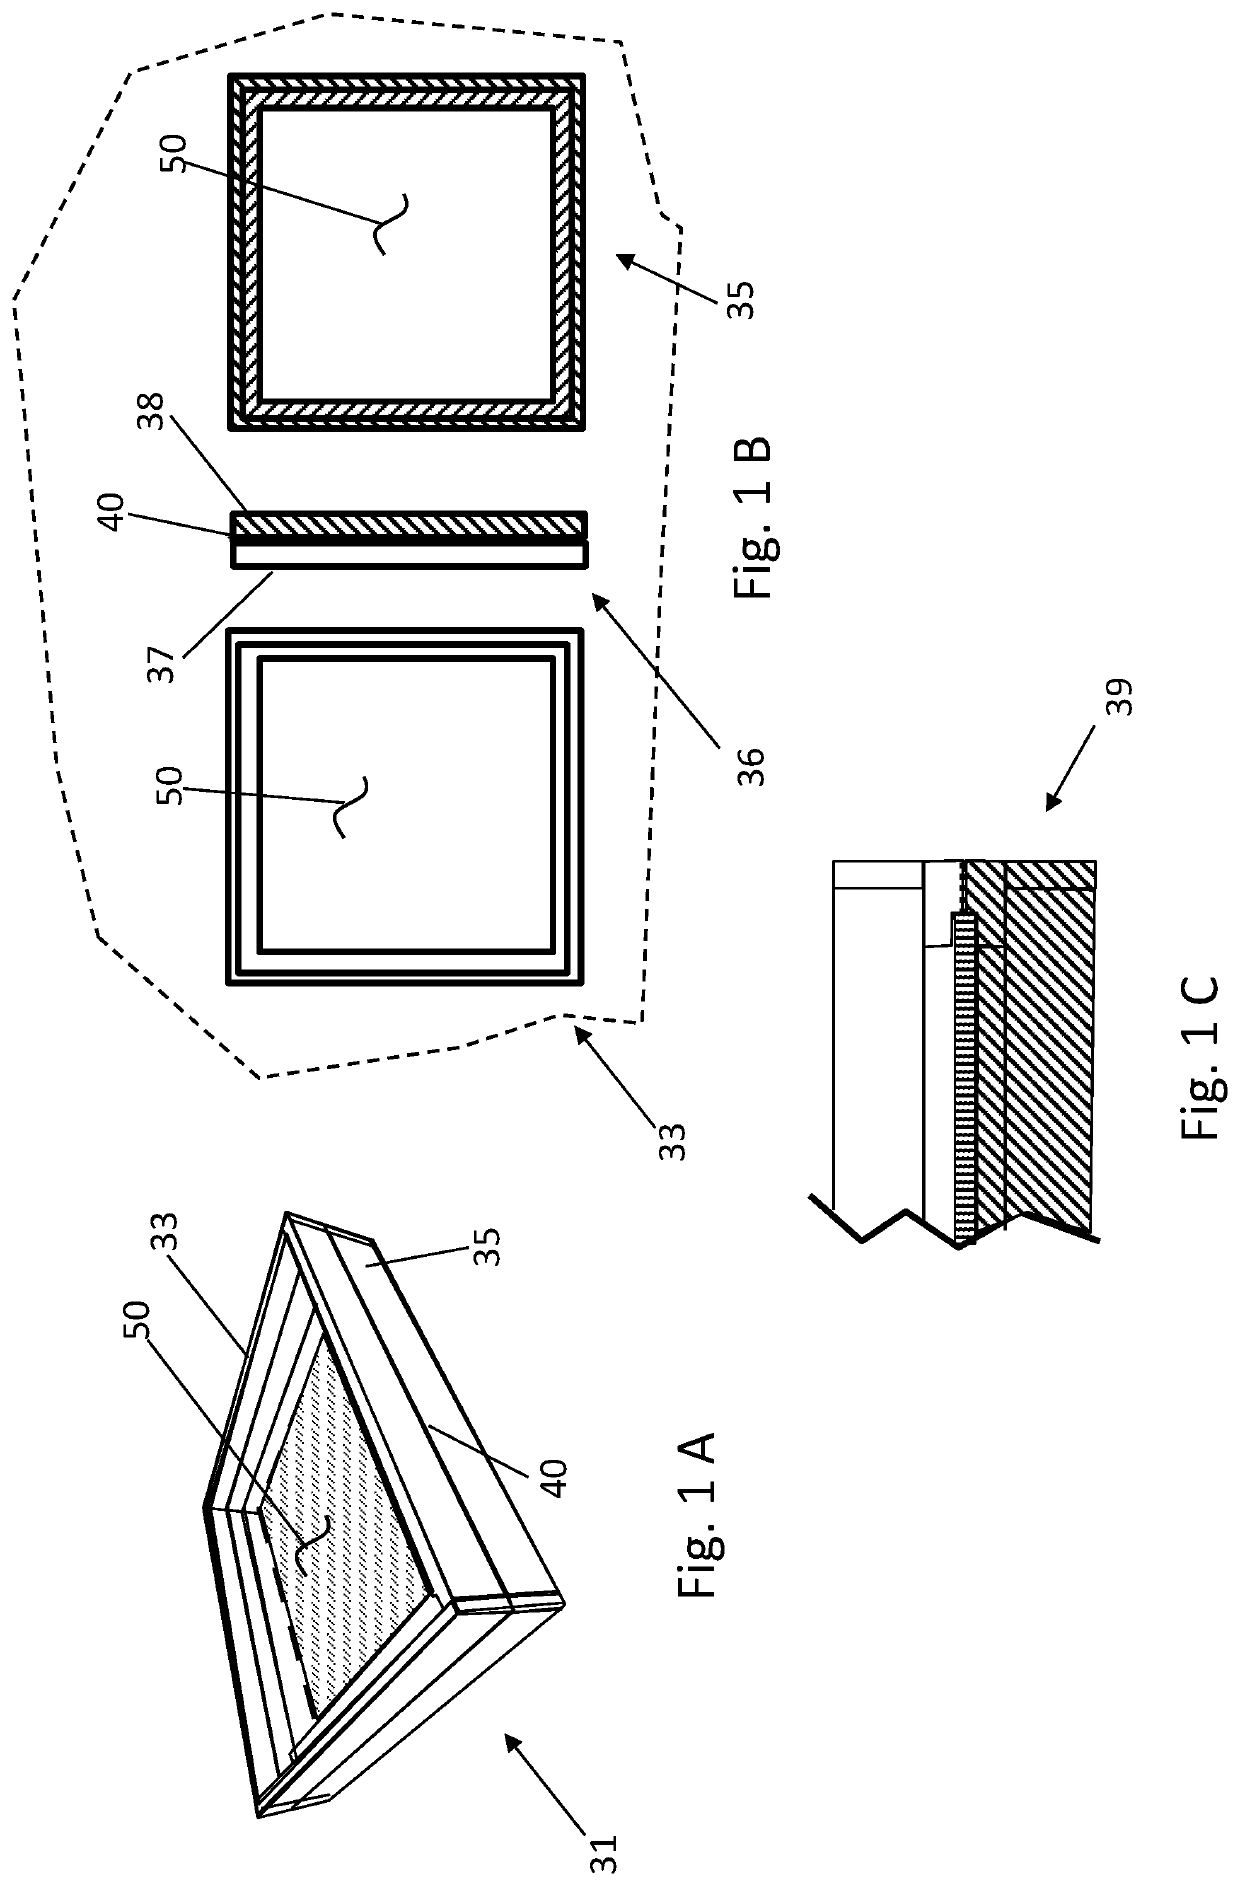 Window device with a cement board as a frame material